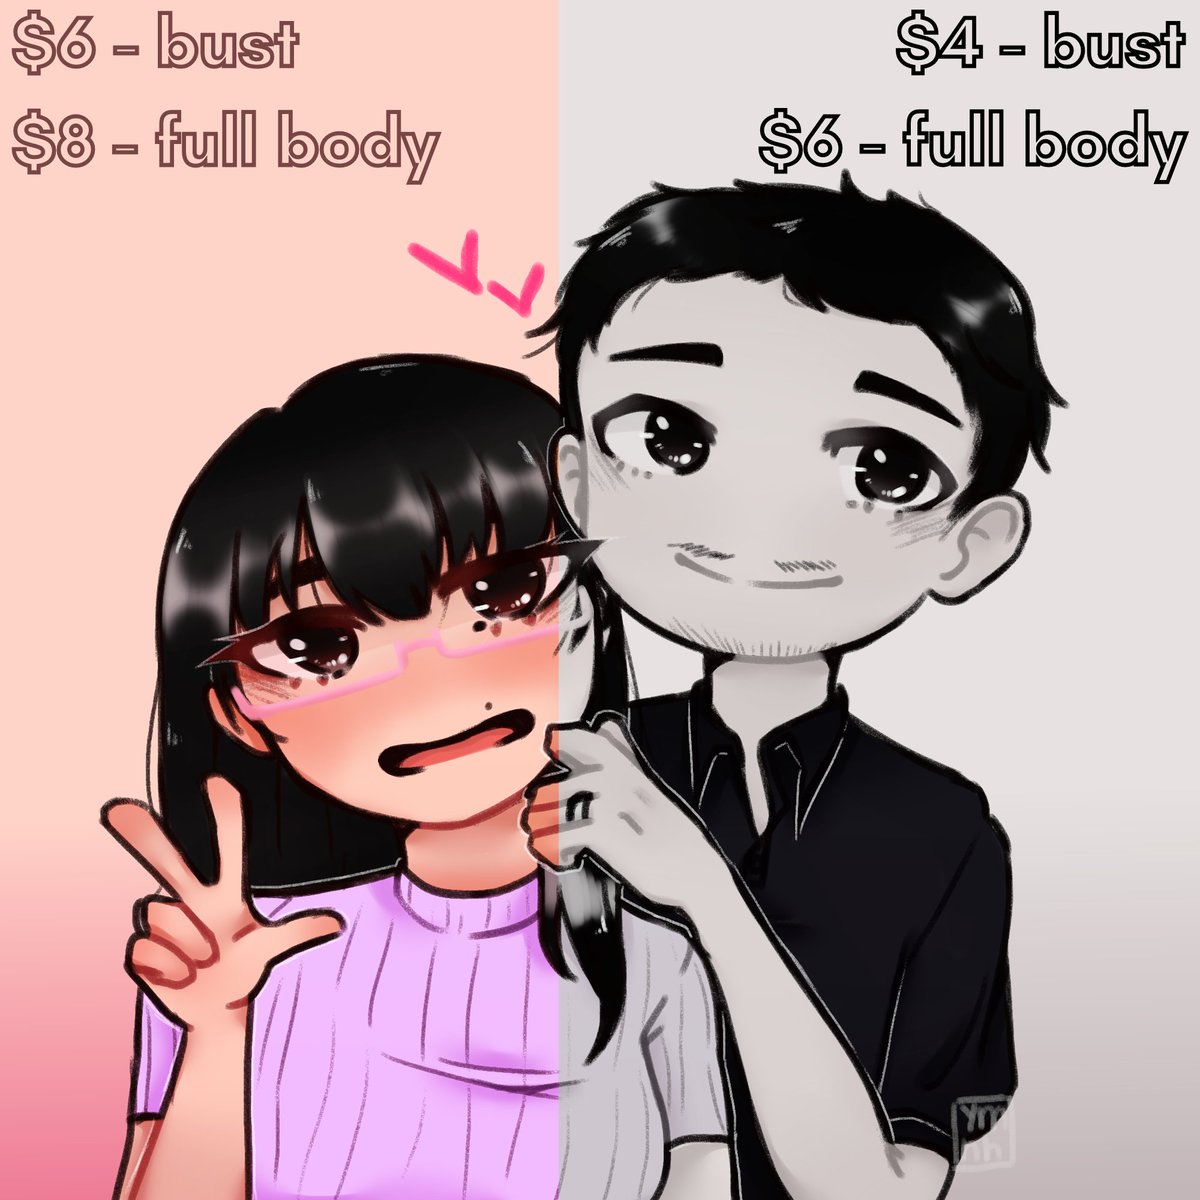 commissions open!
offering this art style for a while :)) 

.
.
.
retweets are appreciated! <33
#artmoots #artwork #art #commissionsopen #Commission #commissionart #commissionopen #Commission